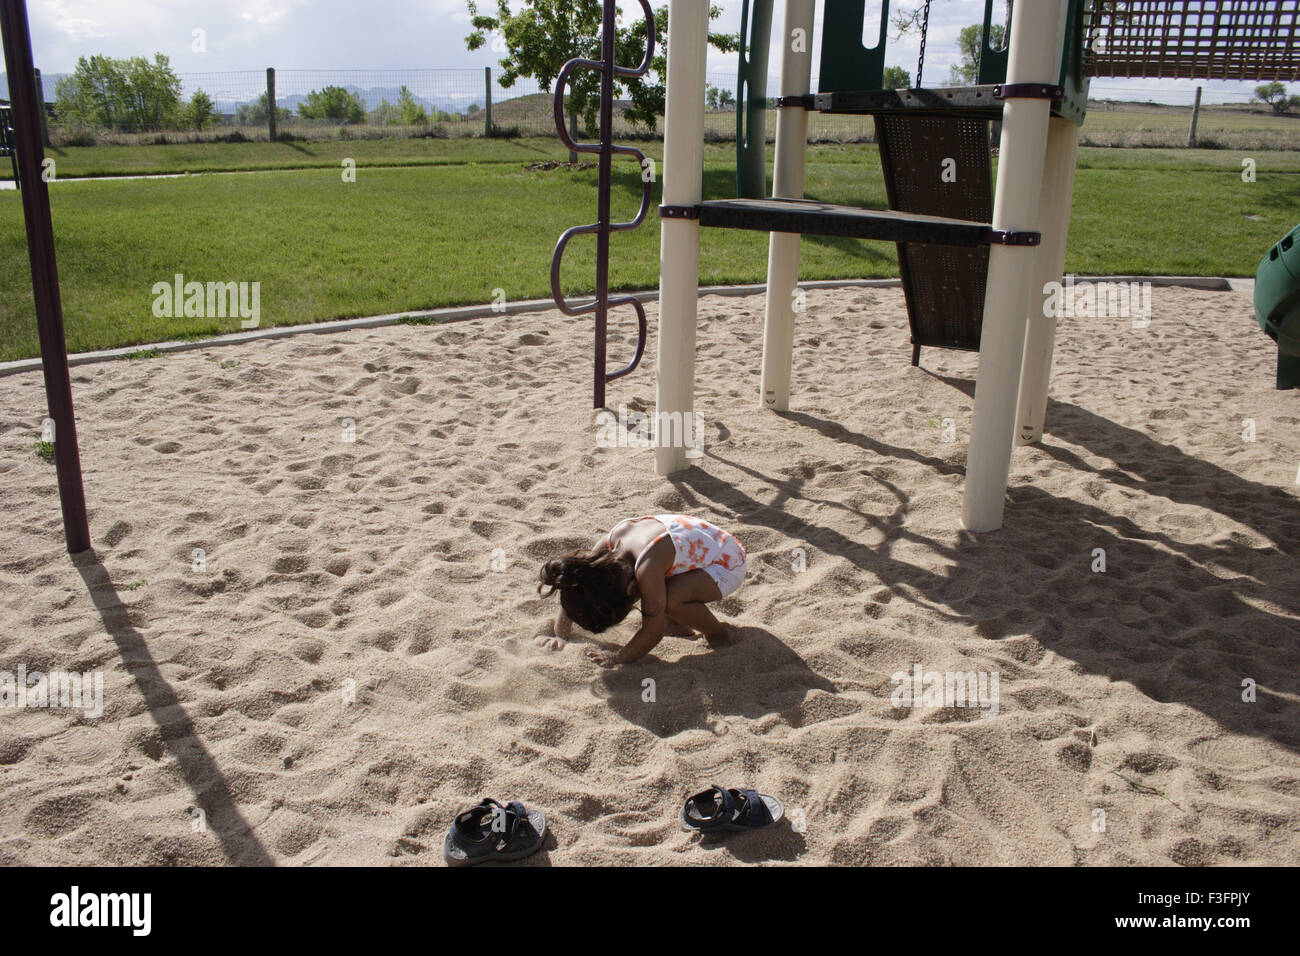 Tree years old child playing in sand in park MR#0543 Stock Photo